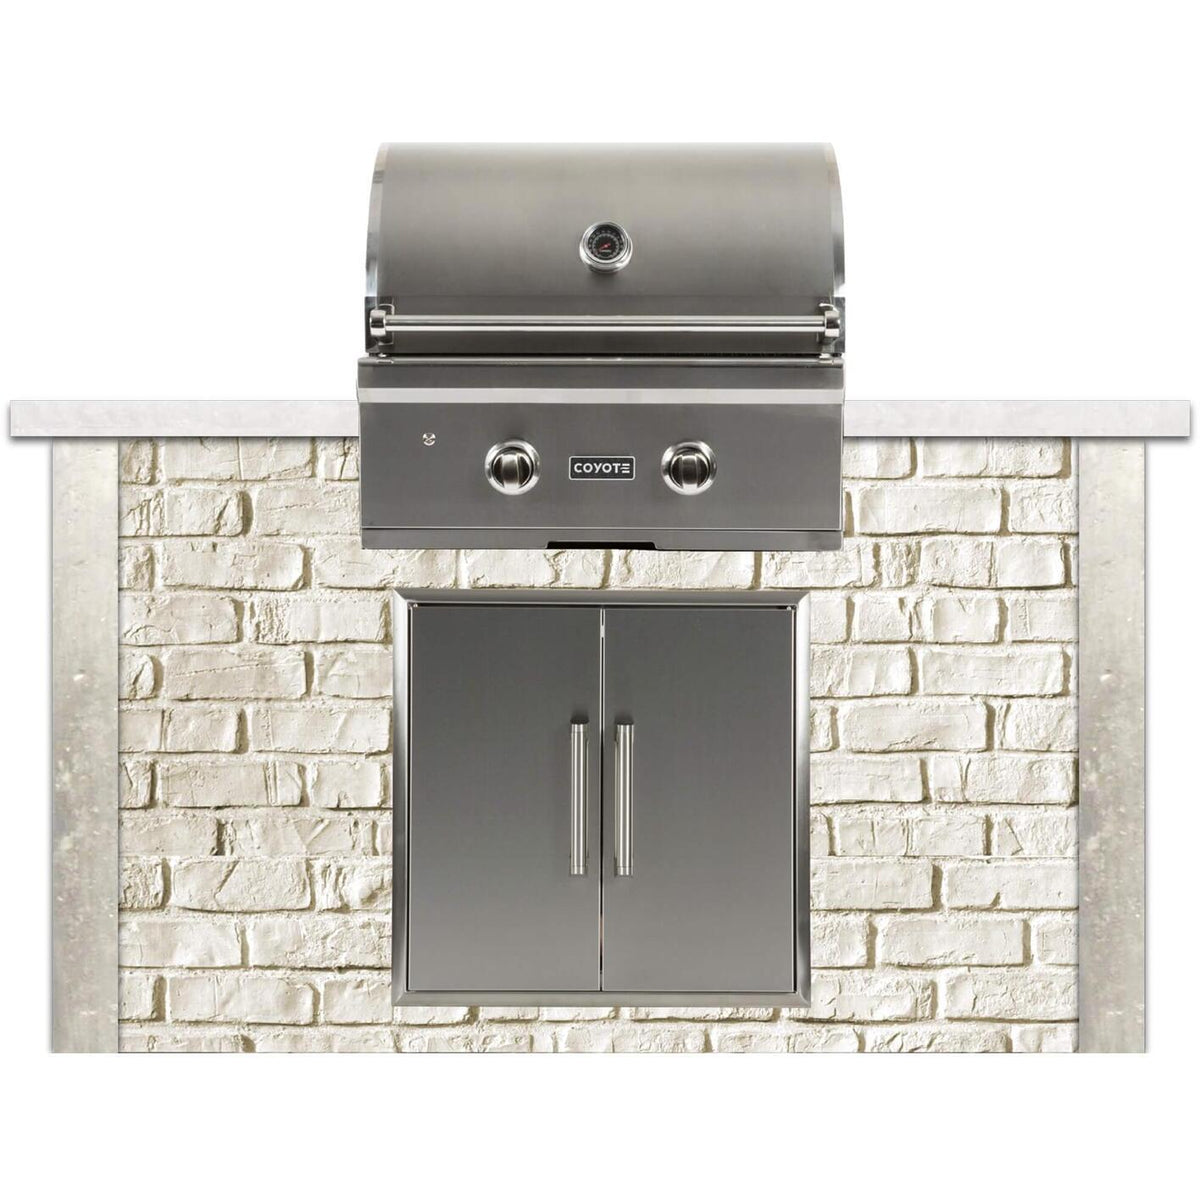 40,000 BTU Island C Series Gas Grill with Access Doors RTAC-G5-RW IMAGE 1